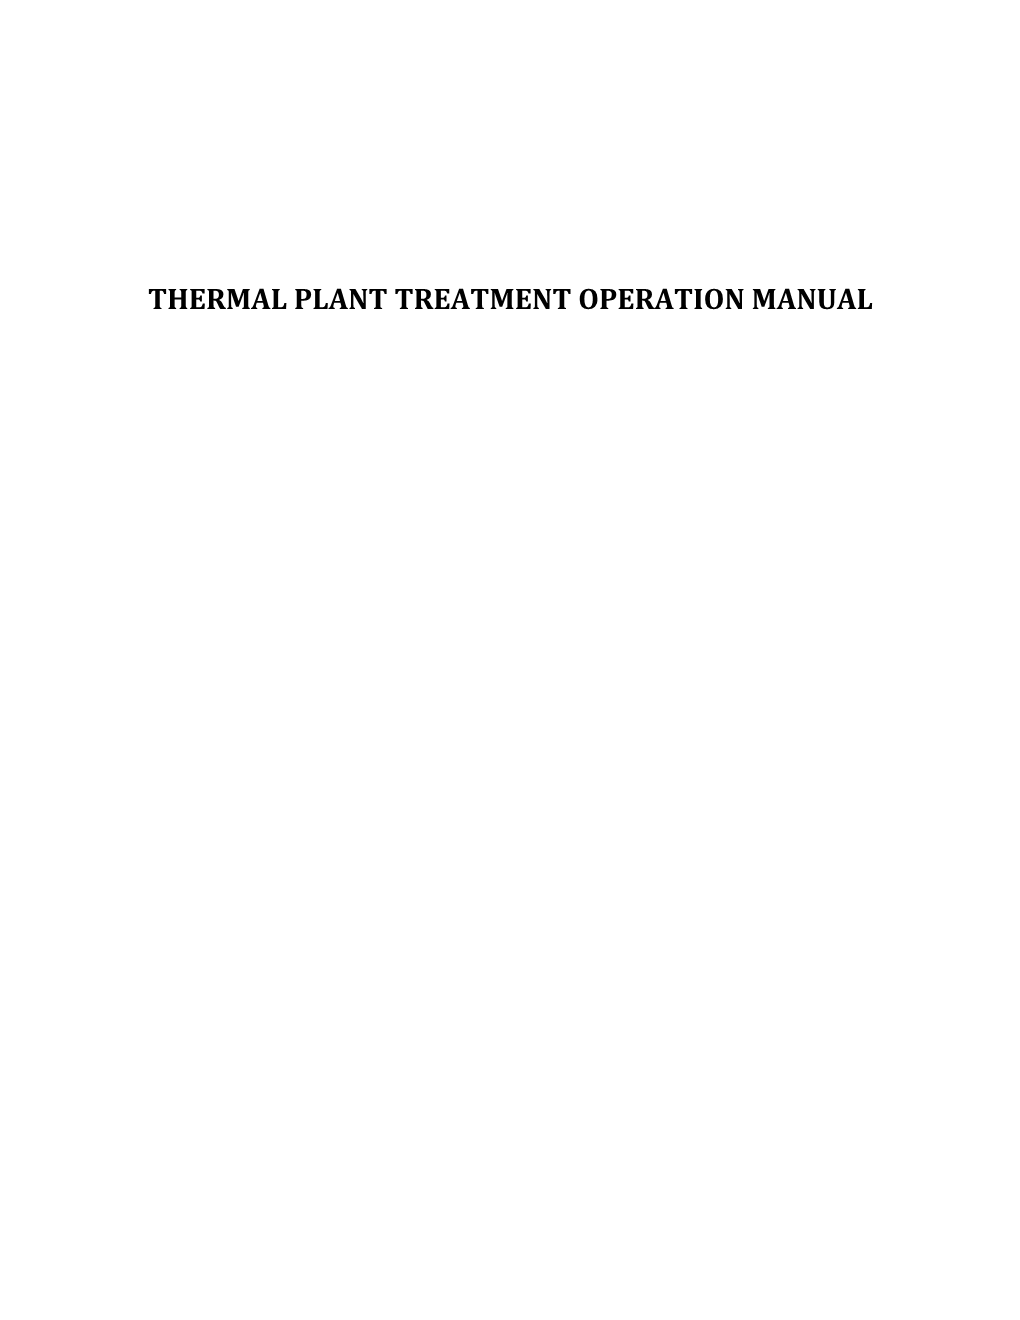 Thermal Plant Treatment Operation Manual